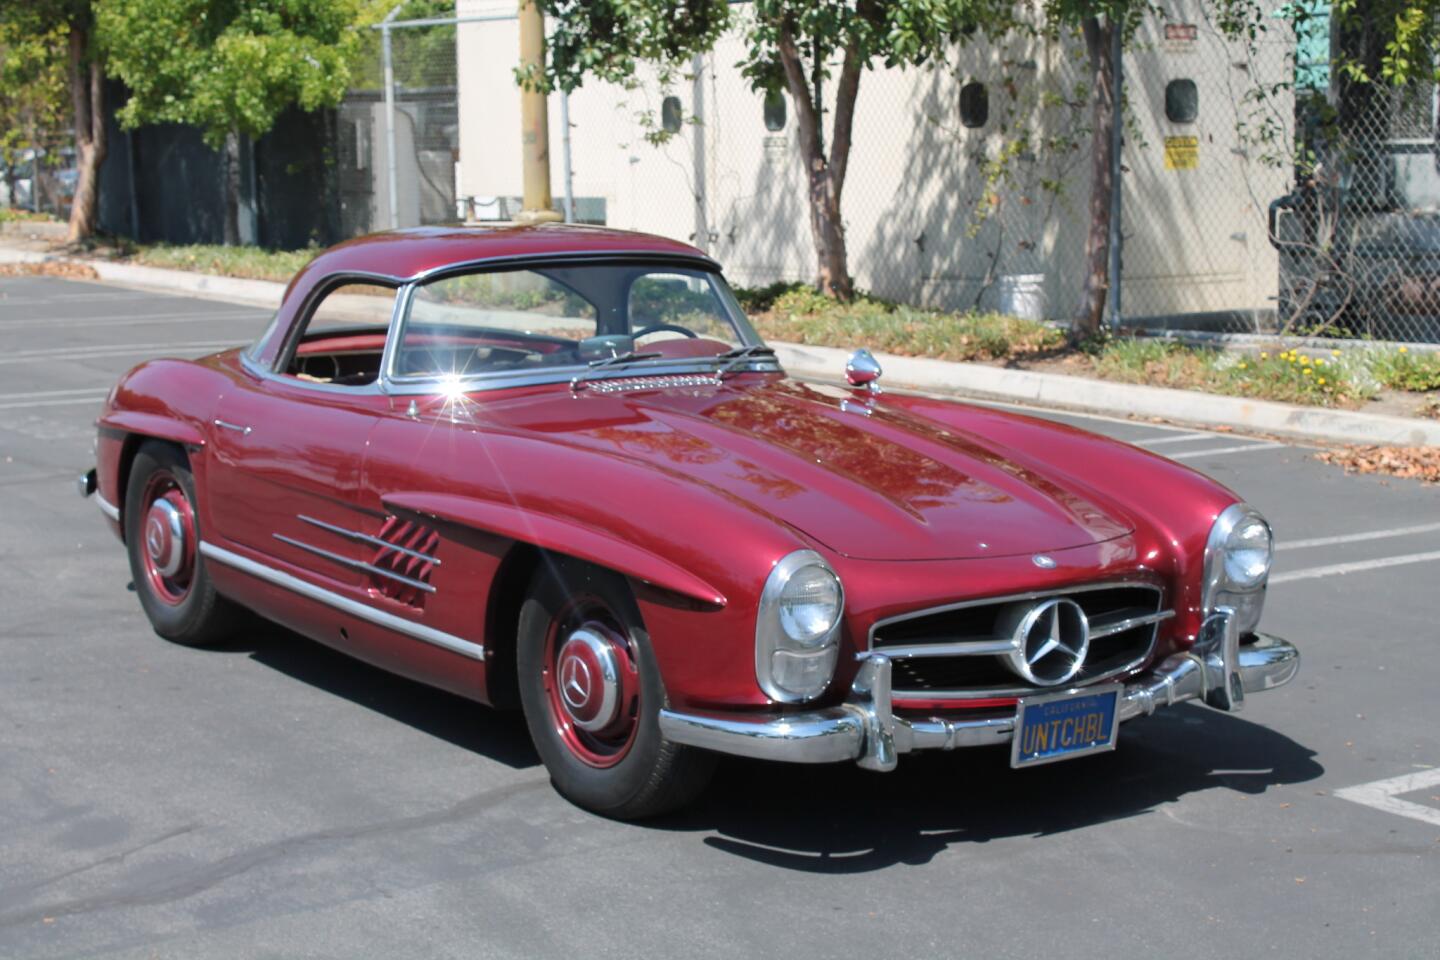 This 1957 Mercedes-Benz 300SL Roadster was formerly owned by Robert Stack, star of "The Untouchables," and later "Unsolved Mysteries." After his death it passed to the Petersen Museum, which is now selling it at auction. The car is estimated to sell for between $600,000 and $800,000.